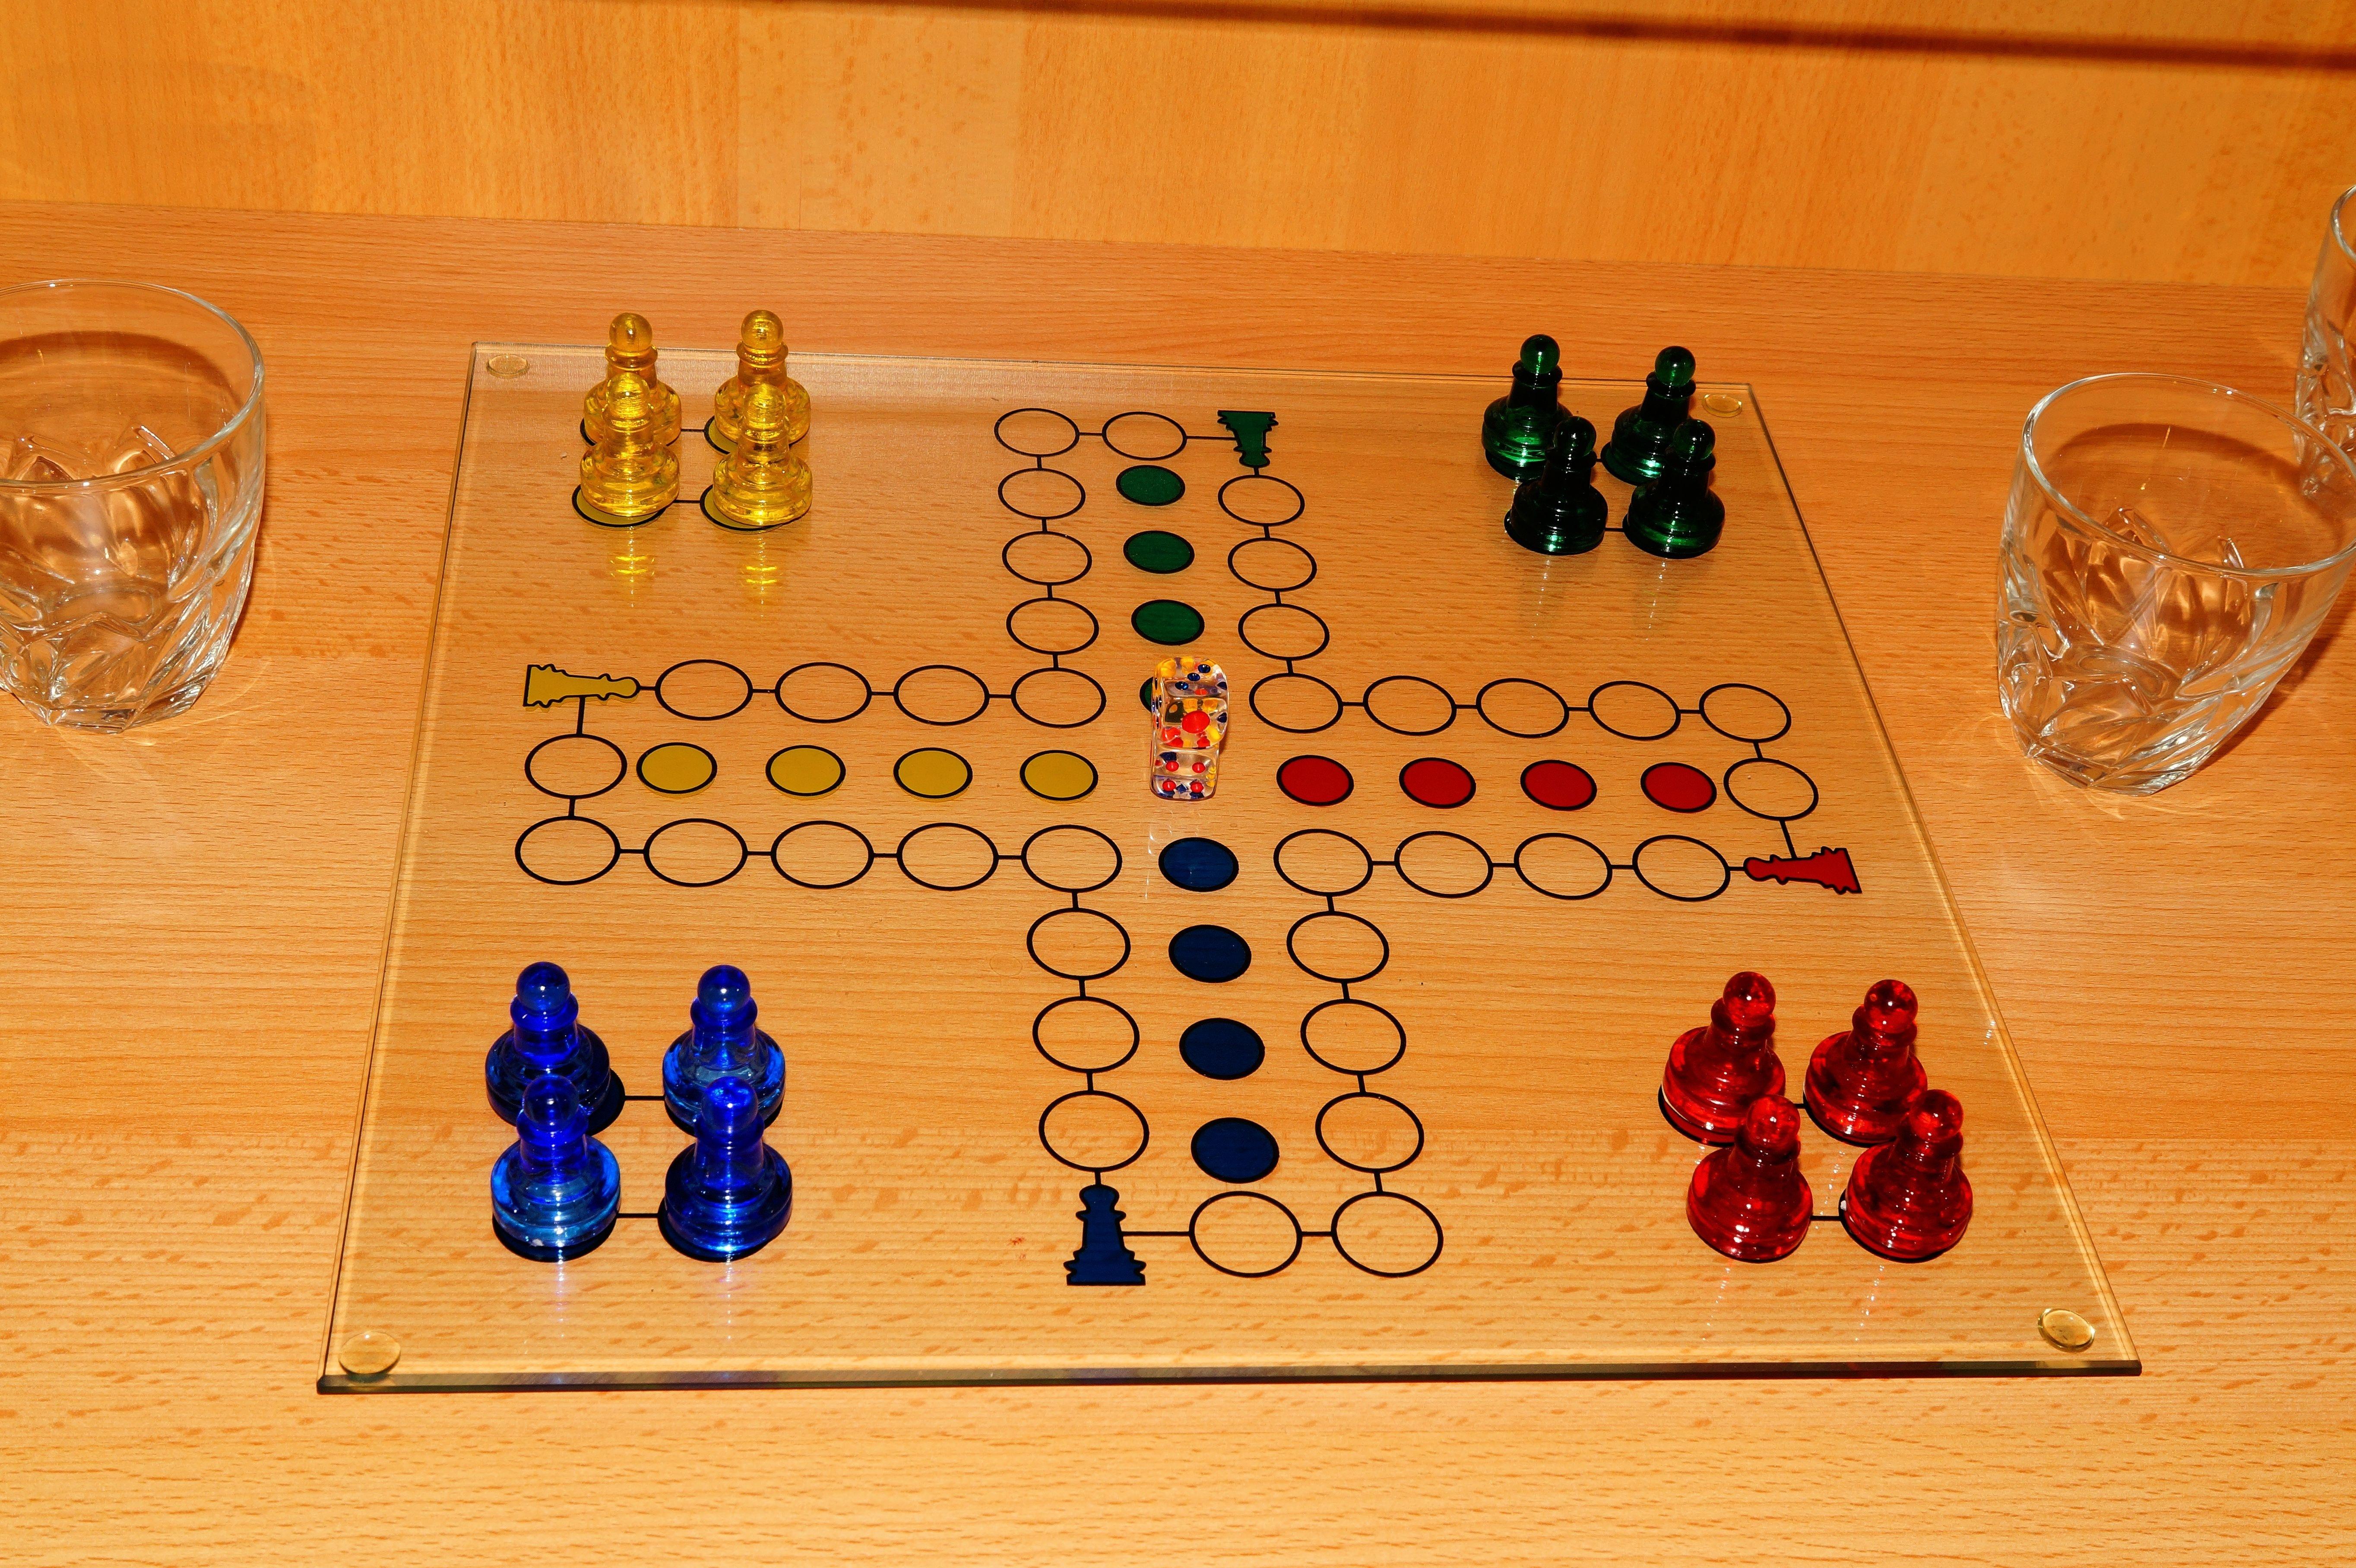 clear glass game board free image